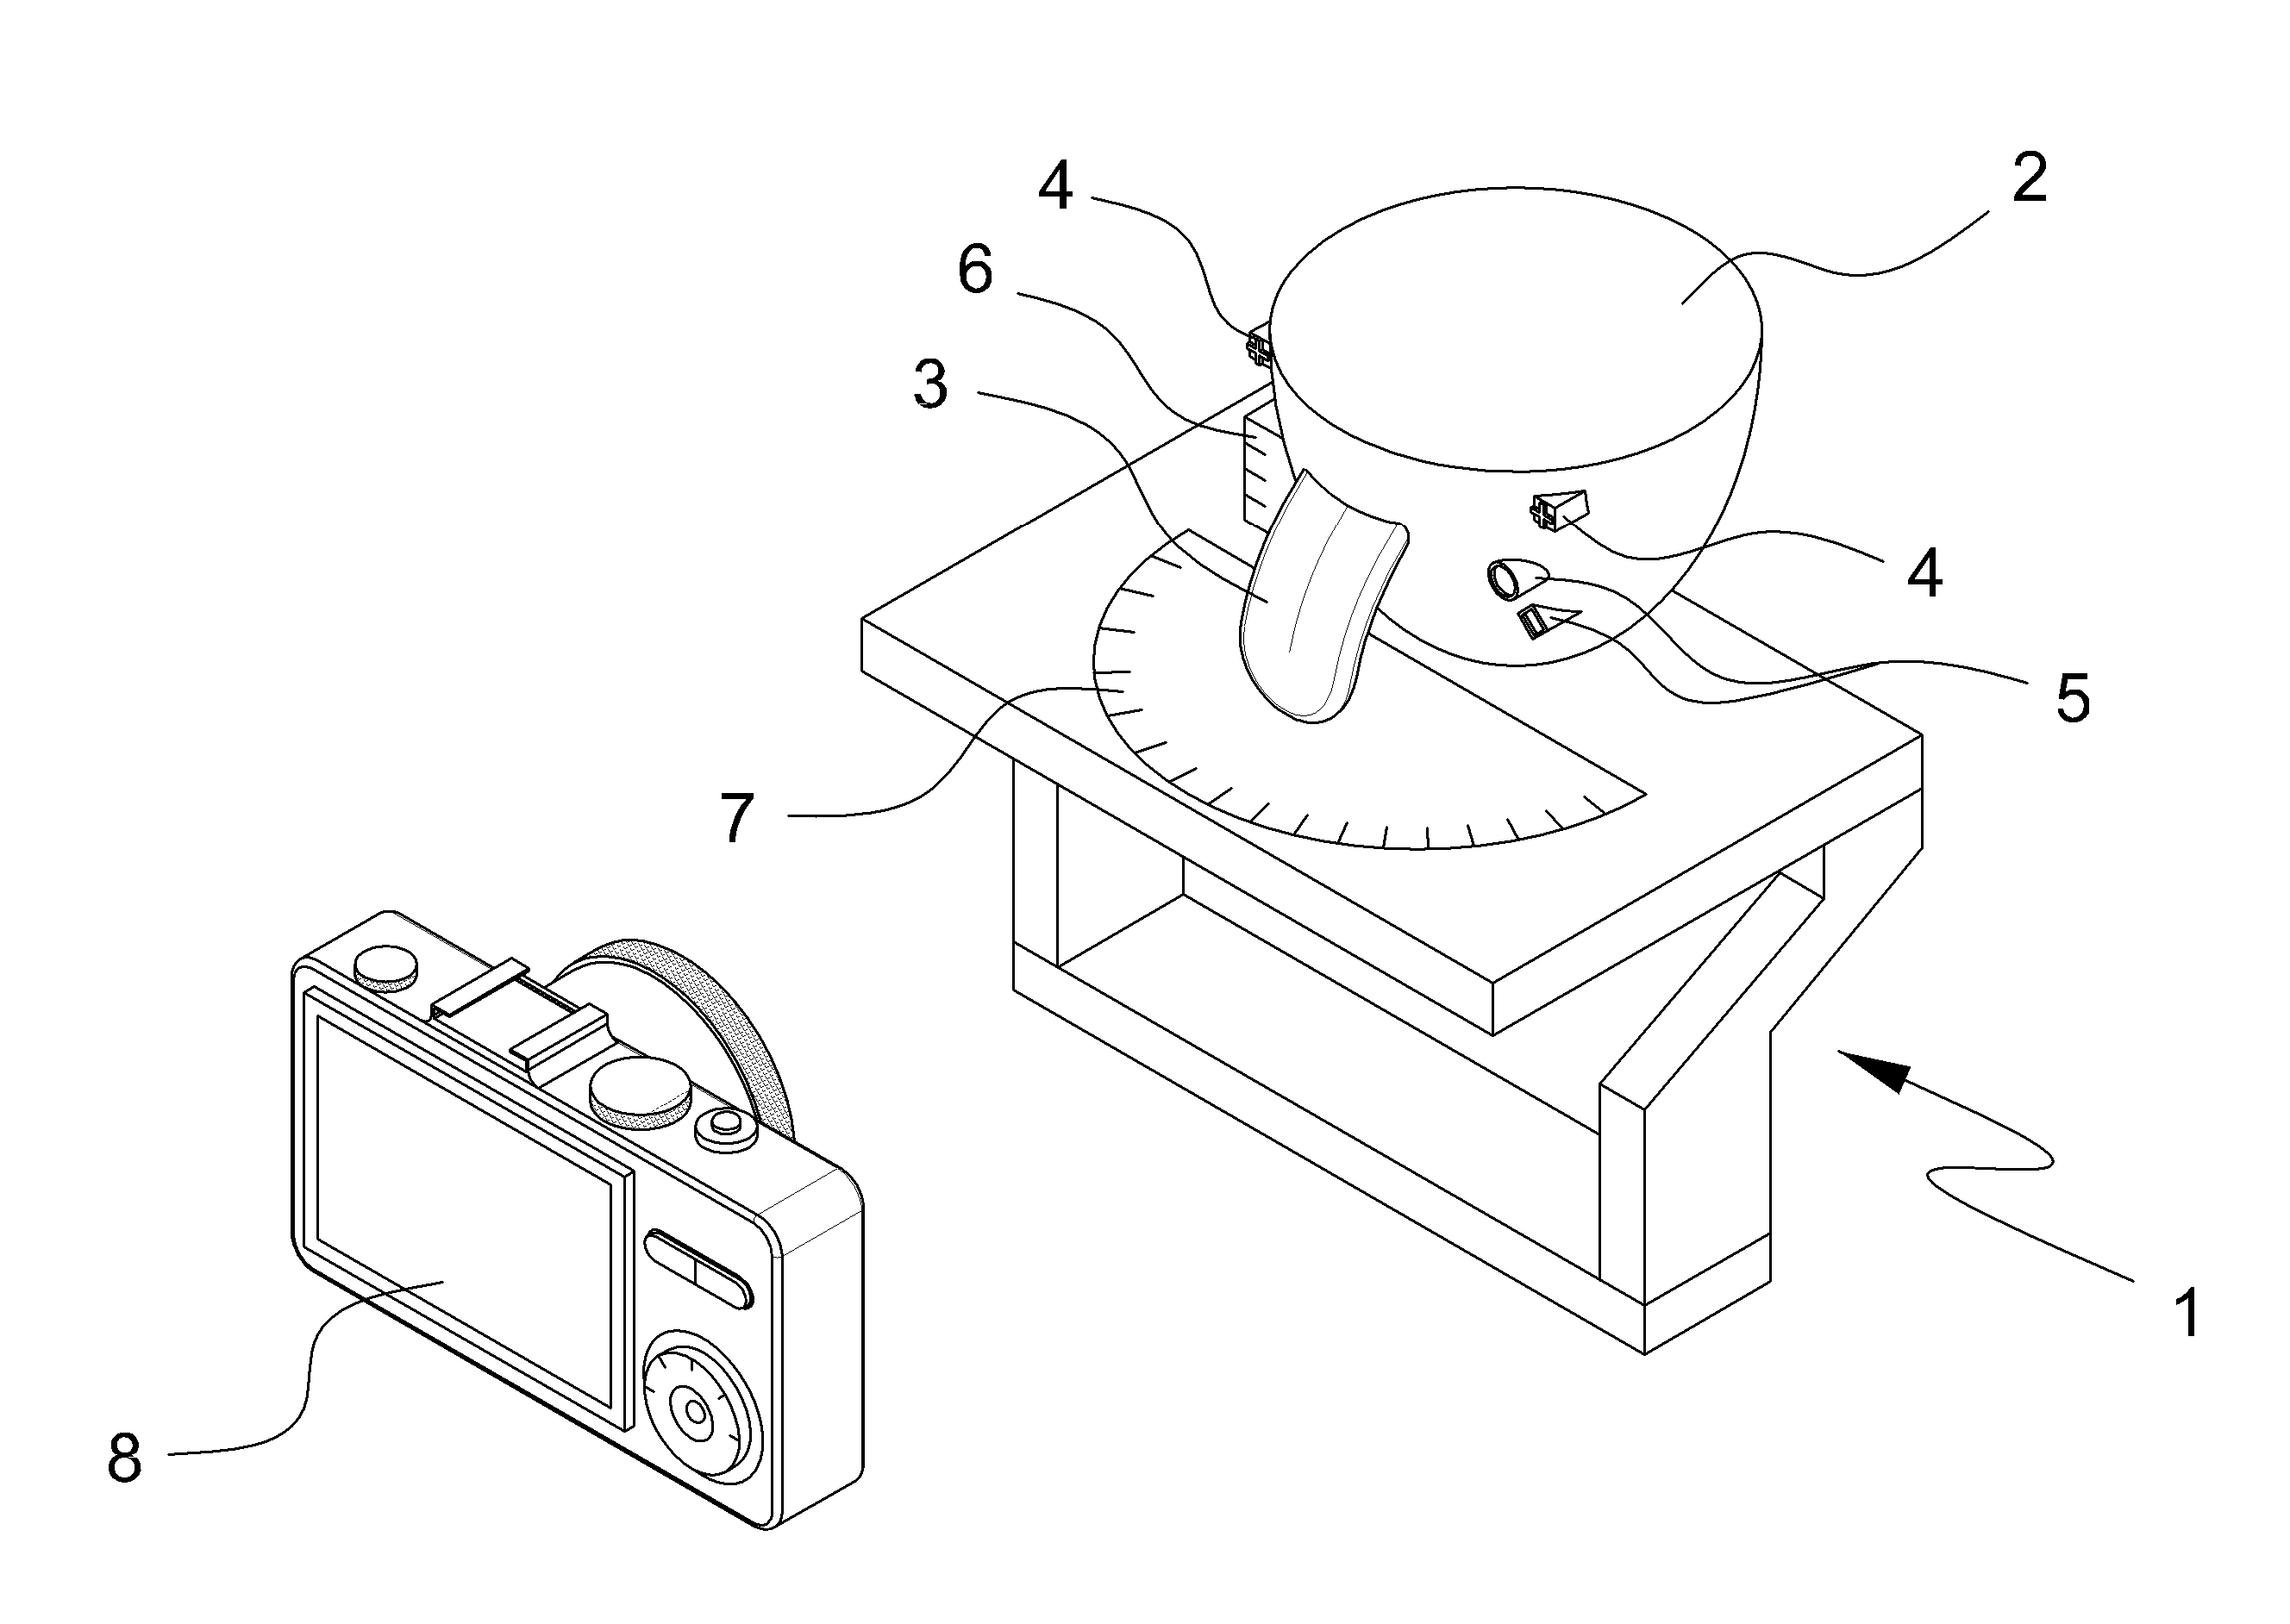 Method for eliminating chromatic aberration caused by an imaging environment and for testing stability of the imaging environment, and chromatic aberration calibration device for use with the same